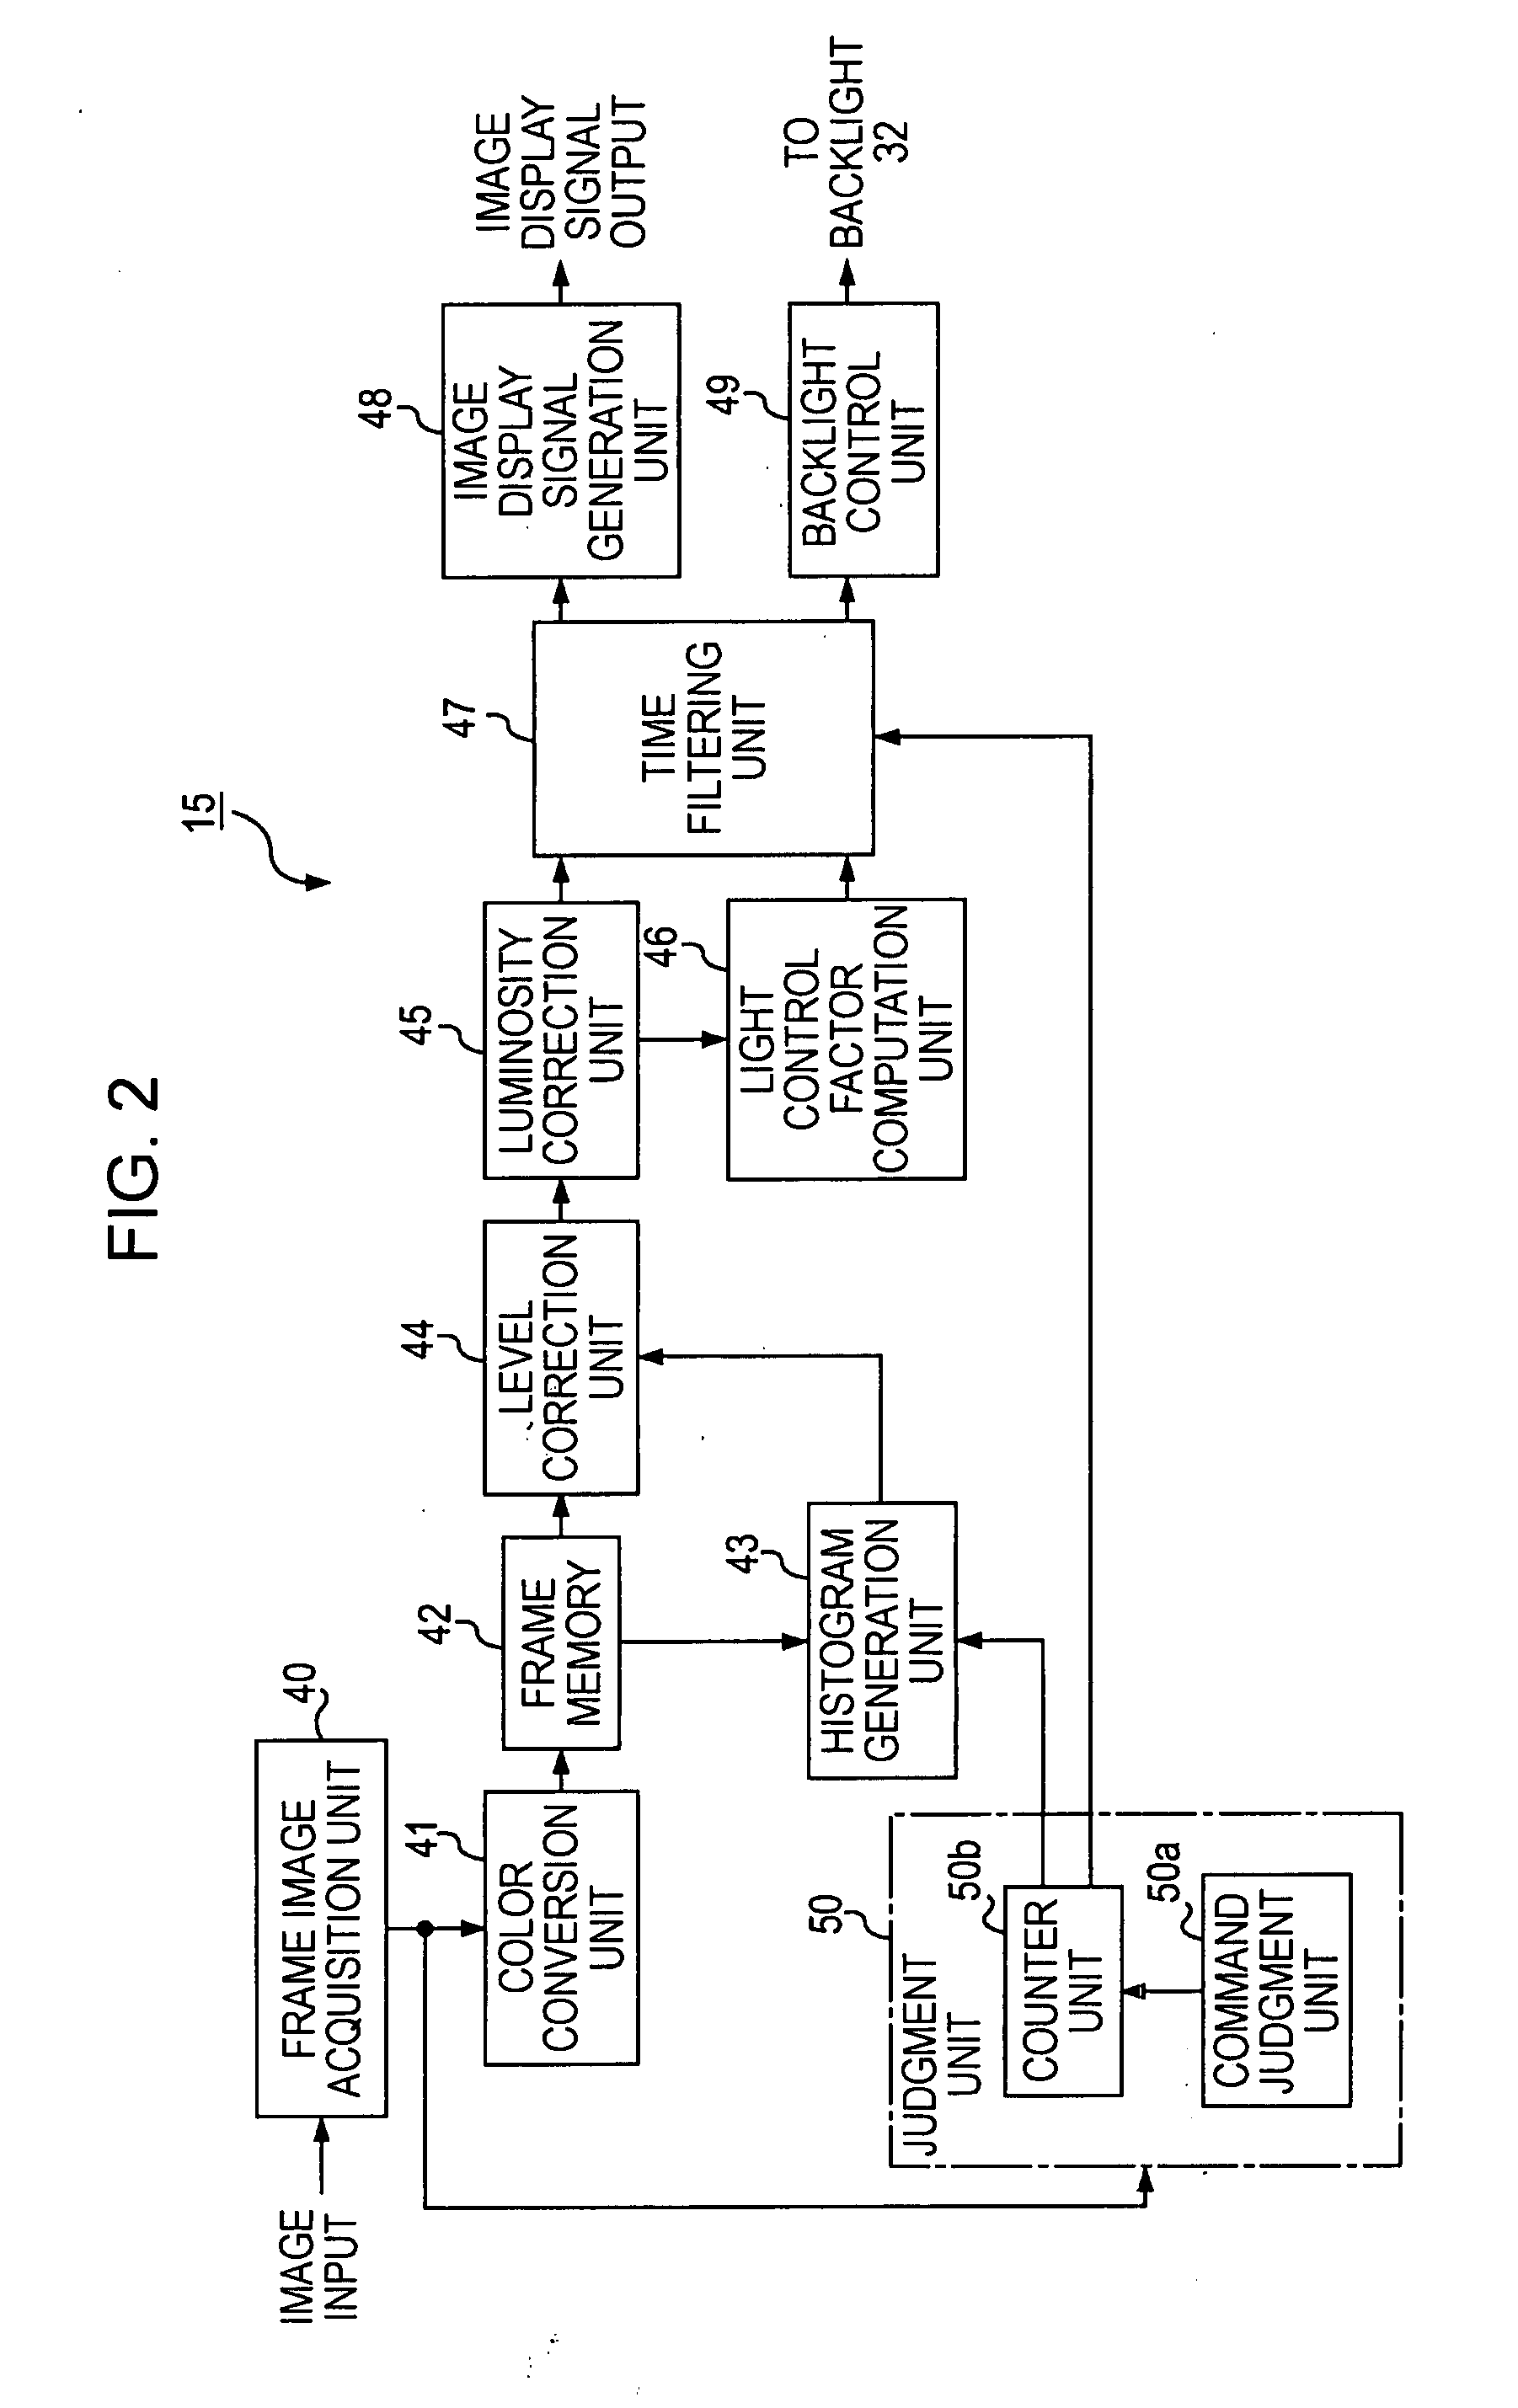 Image display apparatus and electronic apparatus